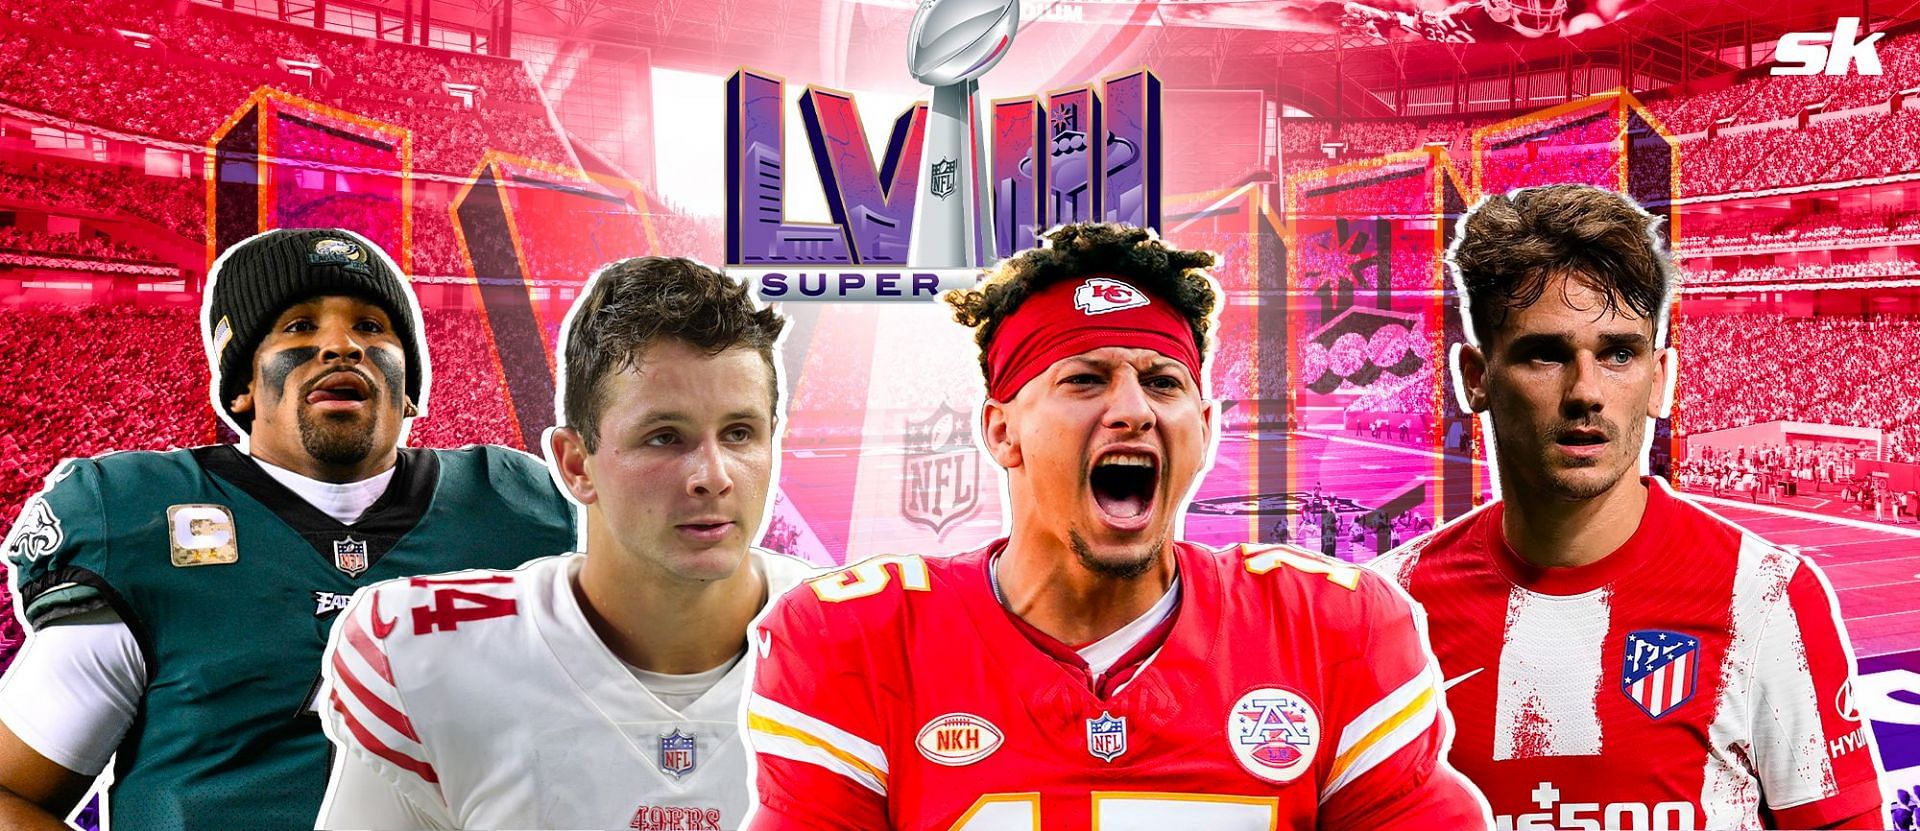 Antoine Griezzman makes bold prediction on Super Bowl race between Patrick Mahomes, Brock Purdy, Jalen Hurts and more